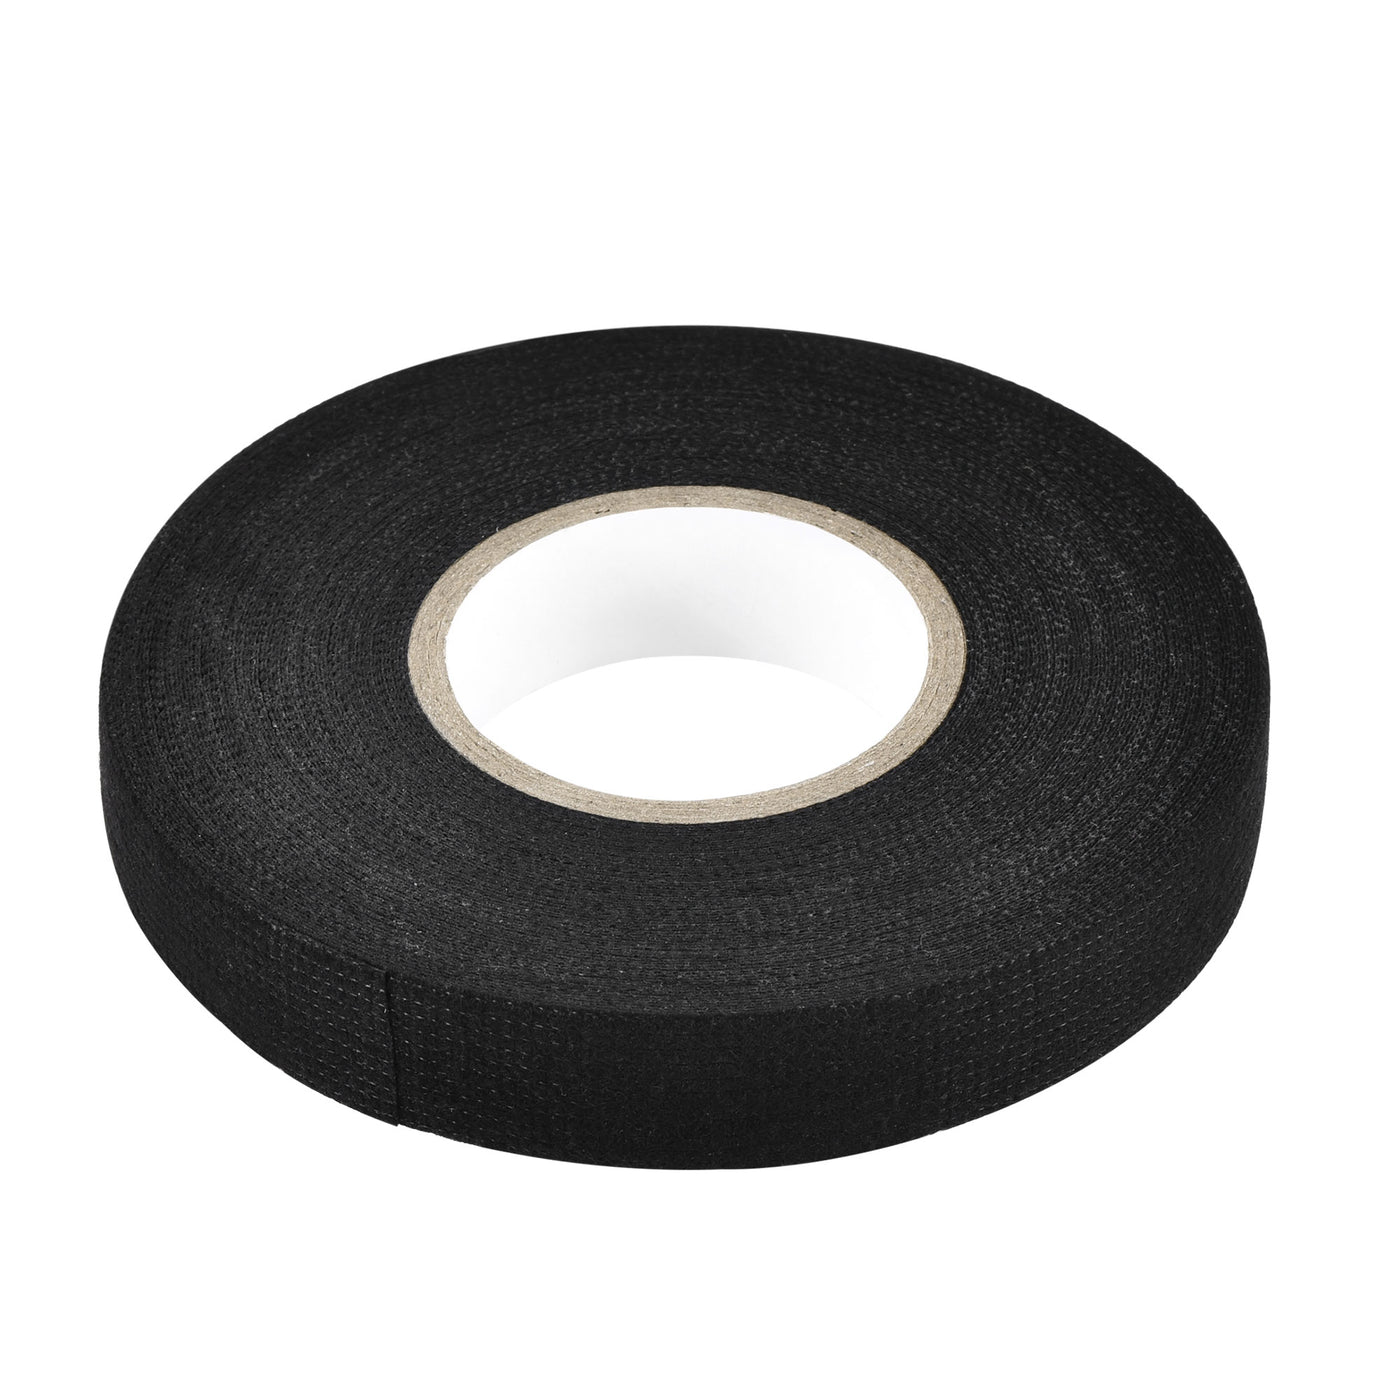 uxcell Uxcell Adhesive Cloth Fabric Tape Wire Harness Looms Single-Side 15mm x 15m Black